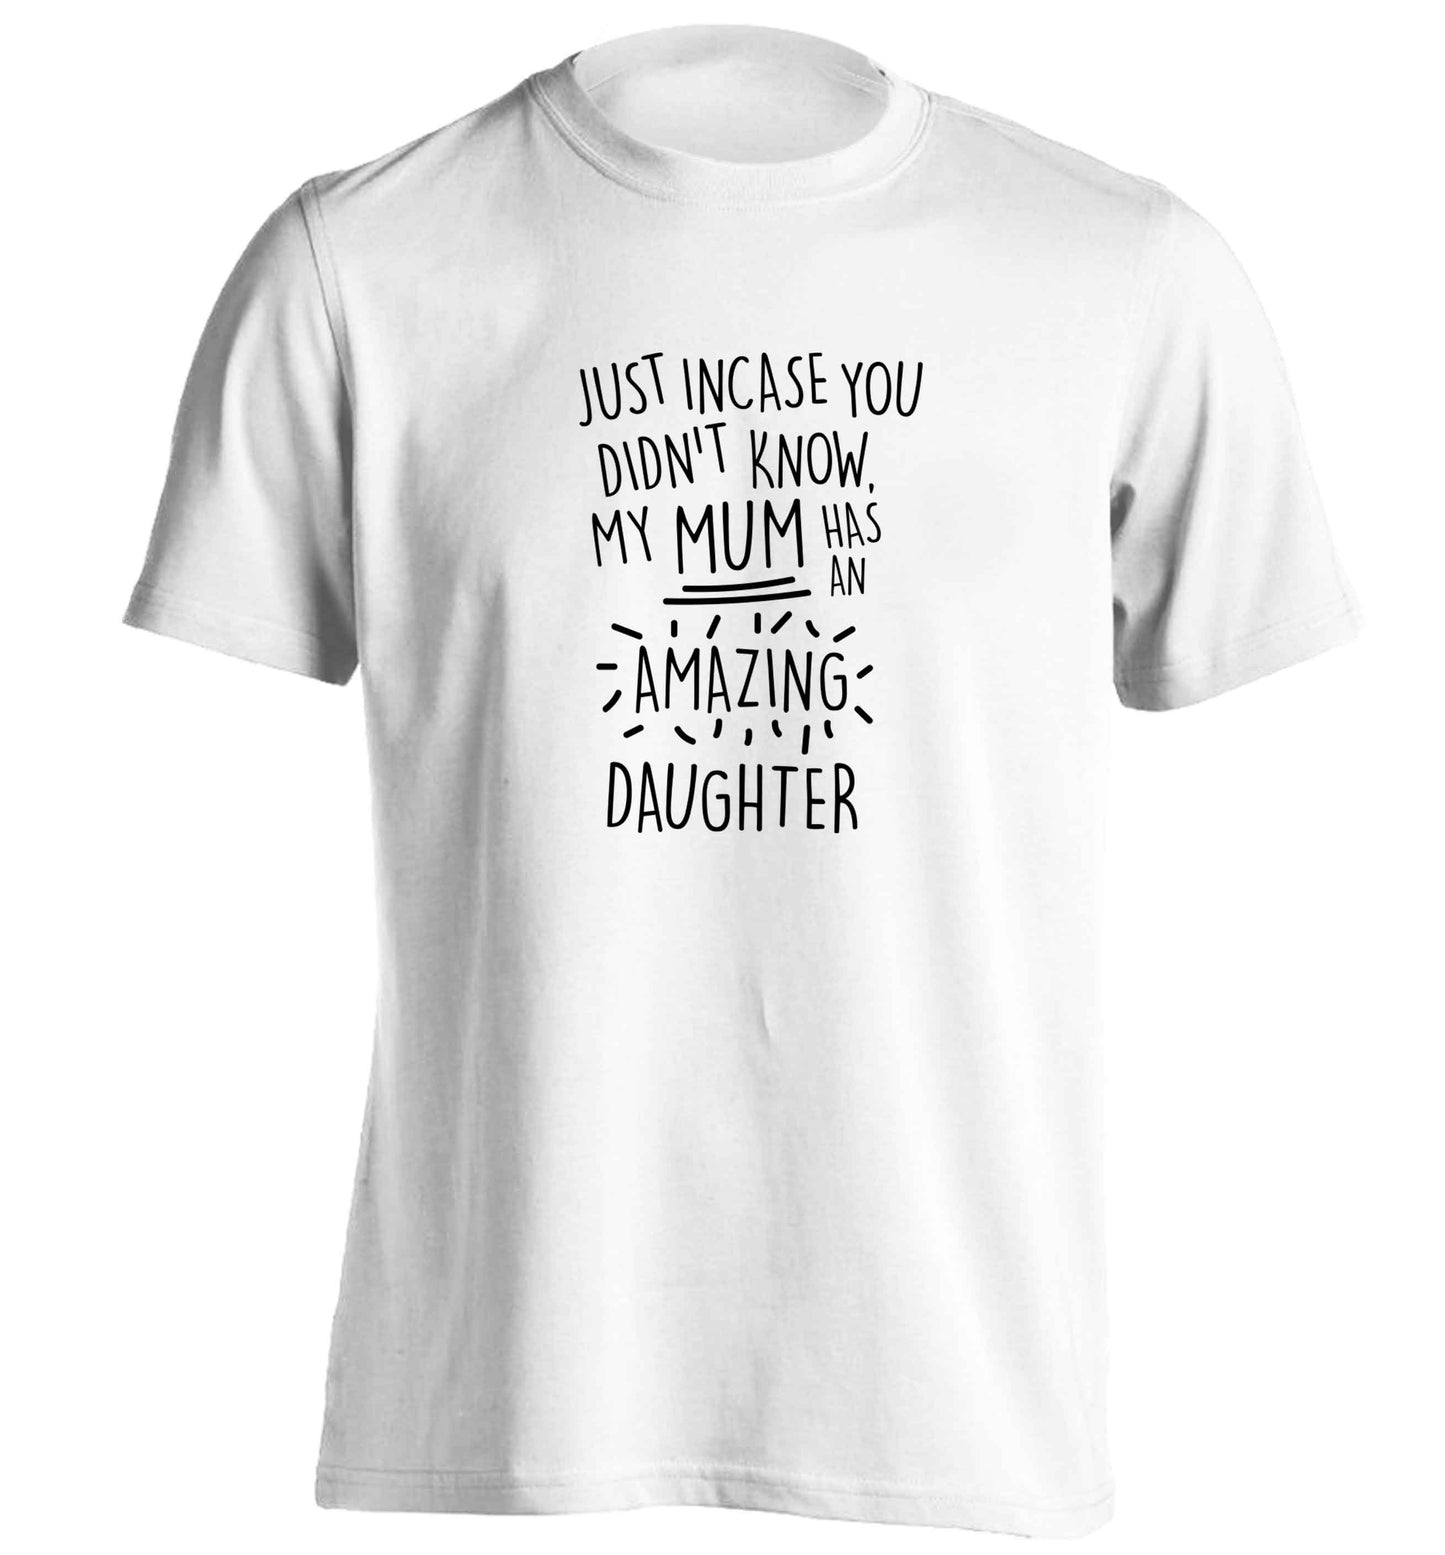 Just incase you didn't know my mum has an amazing daughter adults unisex white Tshirt 2XL